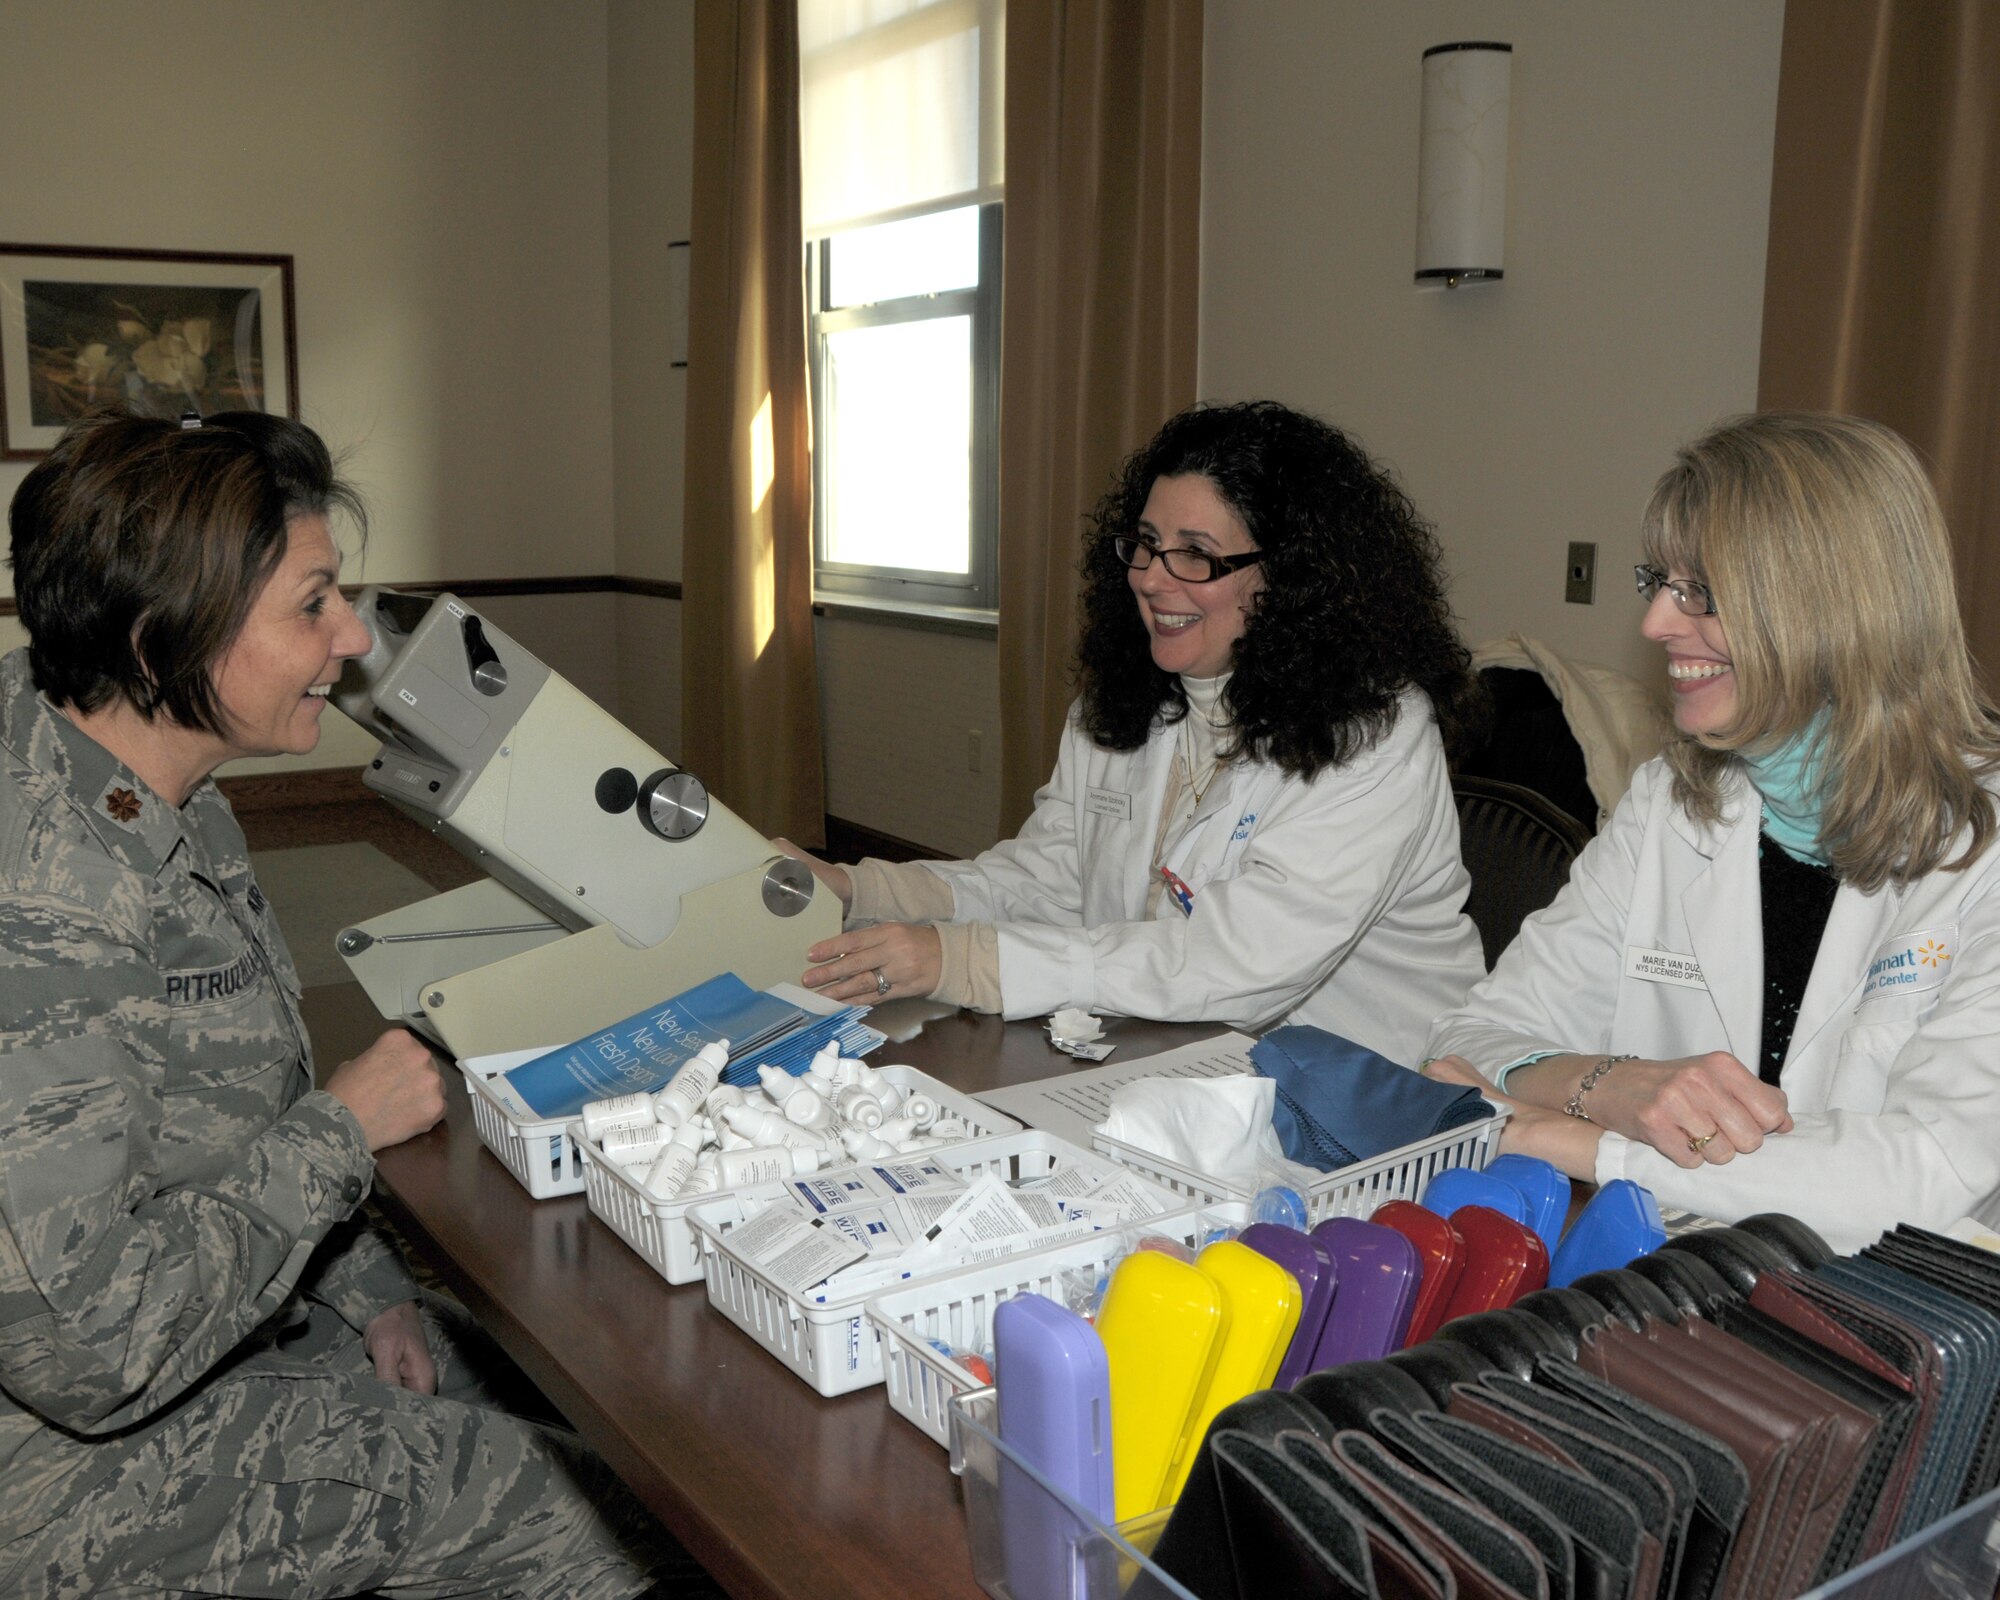 Maj. Andrea Pitruzzella (left), Chief of 914th Airlift Wing Public Affairs chats with Ann Marie Szdnoky and Marie VanDozer, opticians from Walmart Vision about the services they provide on January 15, 2013 at the Niagara Falls Air Reserve Station, NY. Approximately 30 vendors were on hand at the Get Fit Wellness Seminar which was held at the Niagara Heritage Center. Some of the vendors offered information on bone density screening, smoking cessation, glucose/BMI screening, animal therapy and more. (U.S. Air Force photo by Peter Borys)